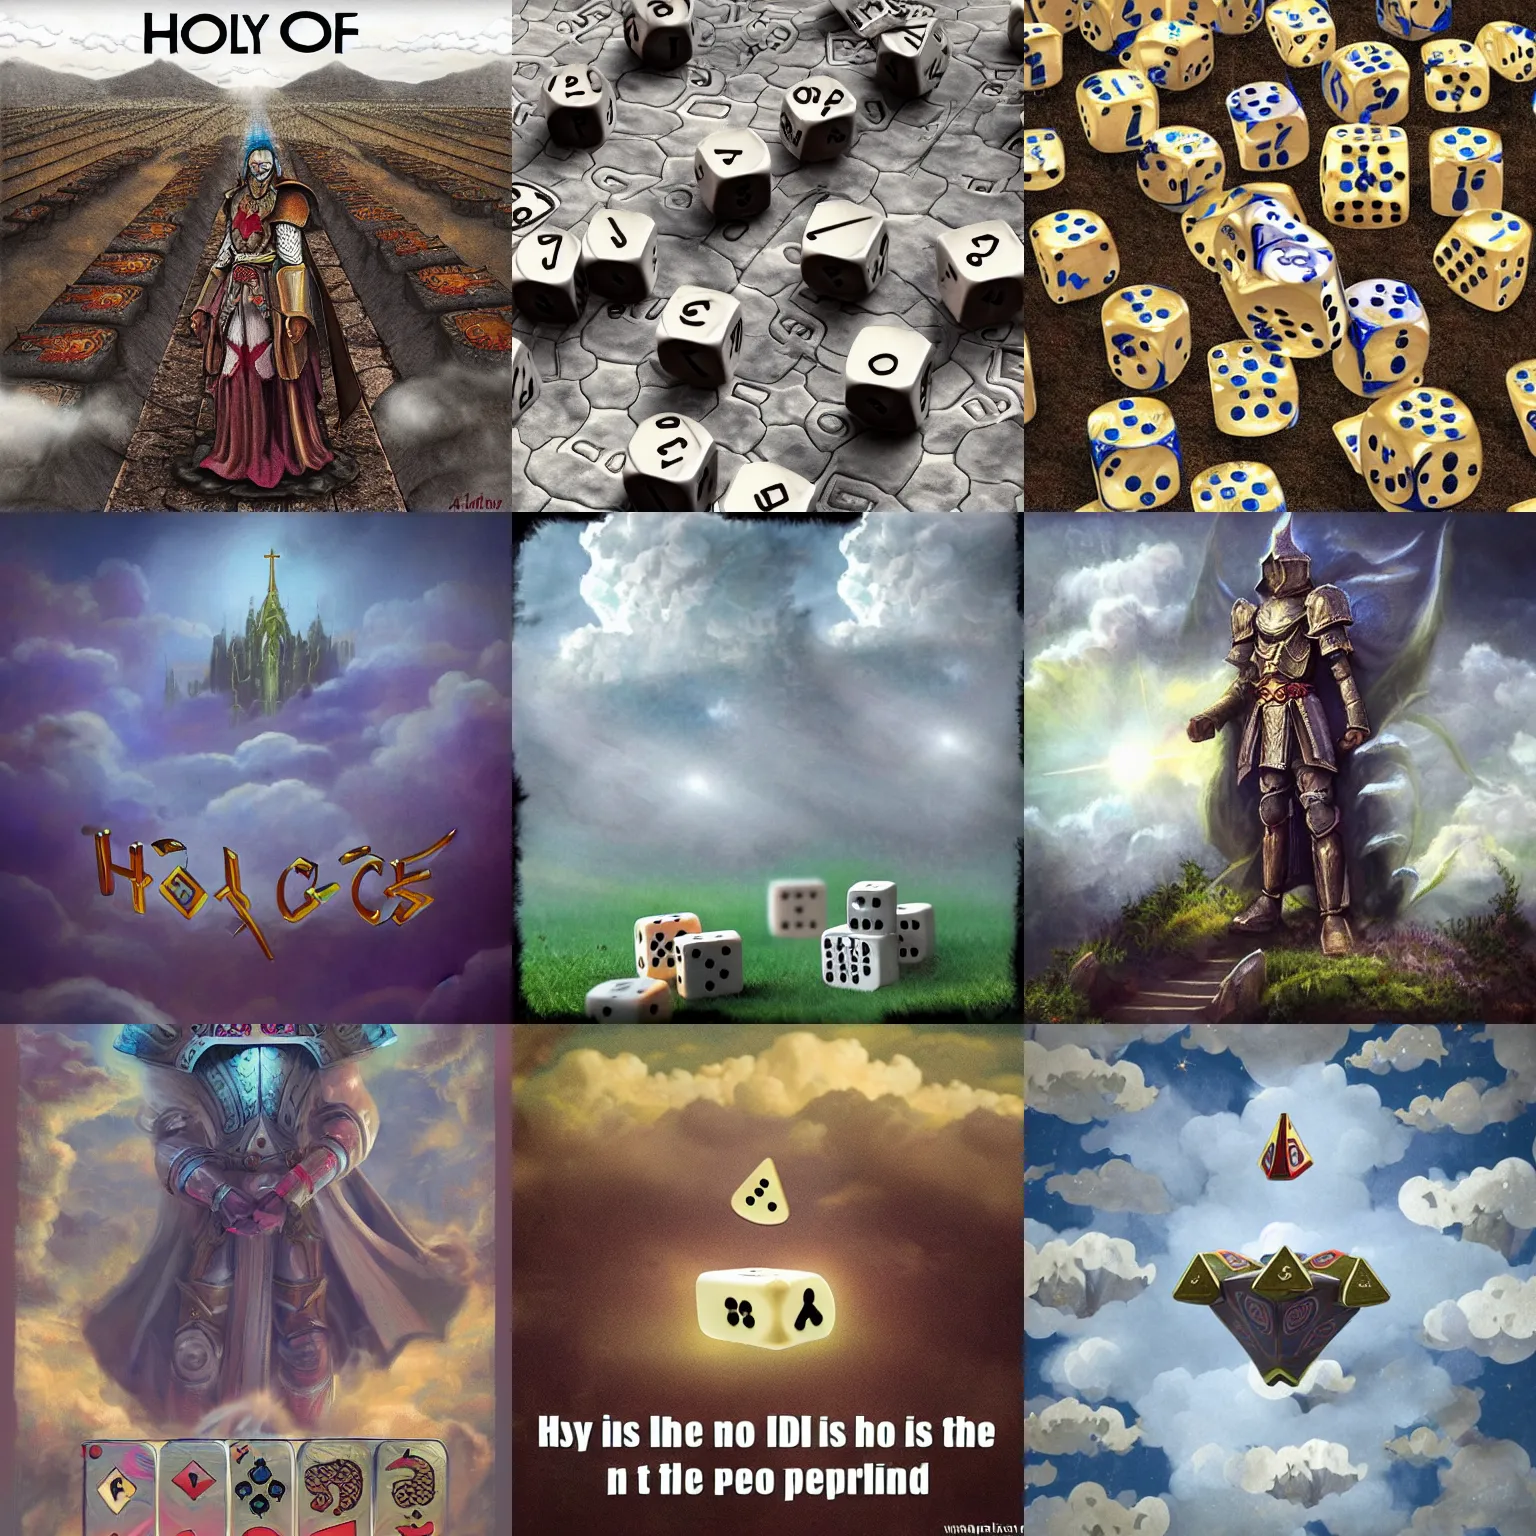 Prompt: holy dice in the clouds, on the ground are people in fantasy armor praying